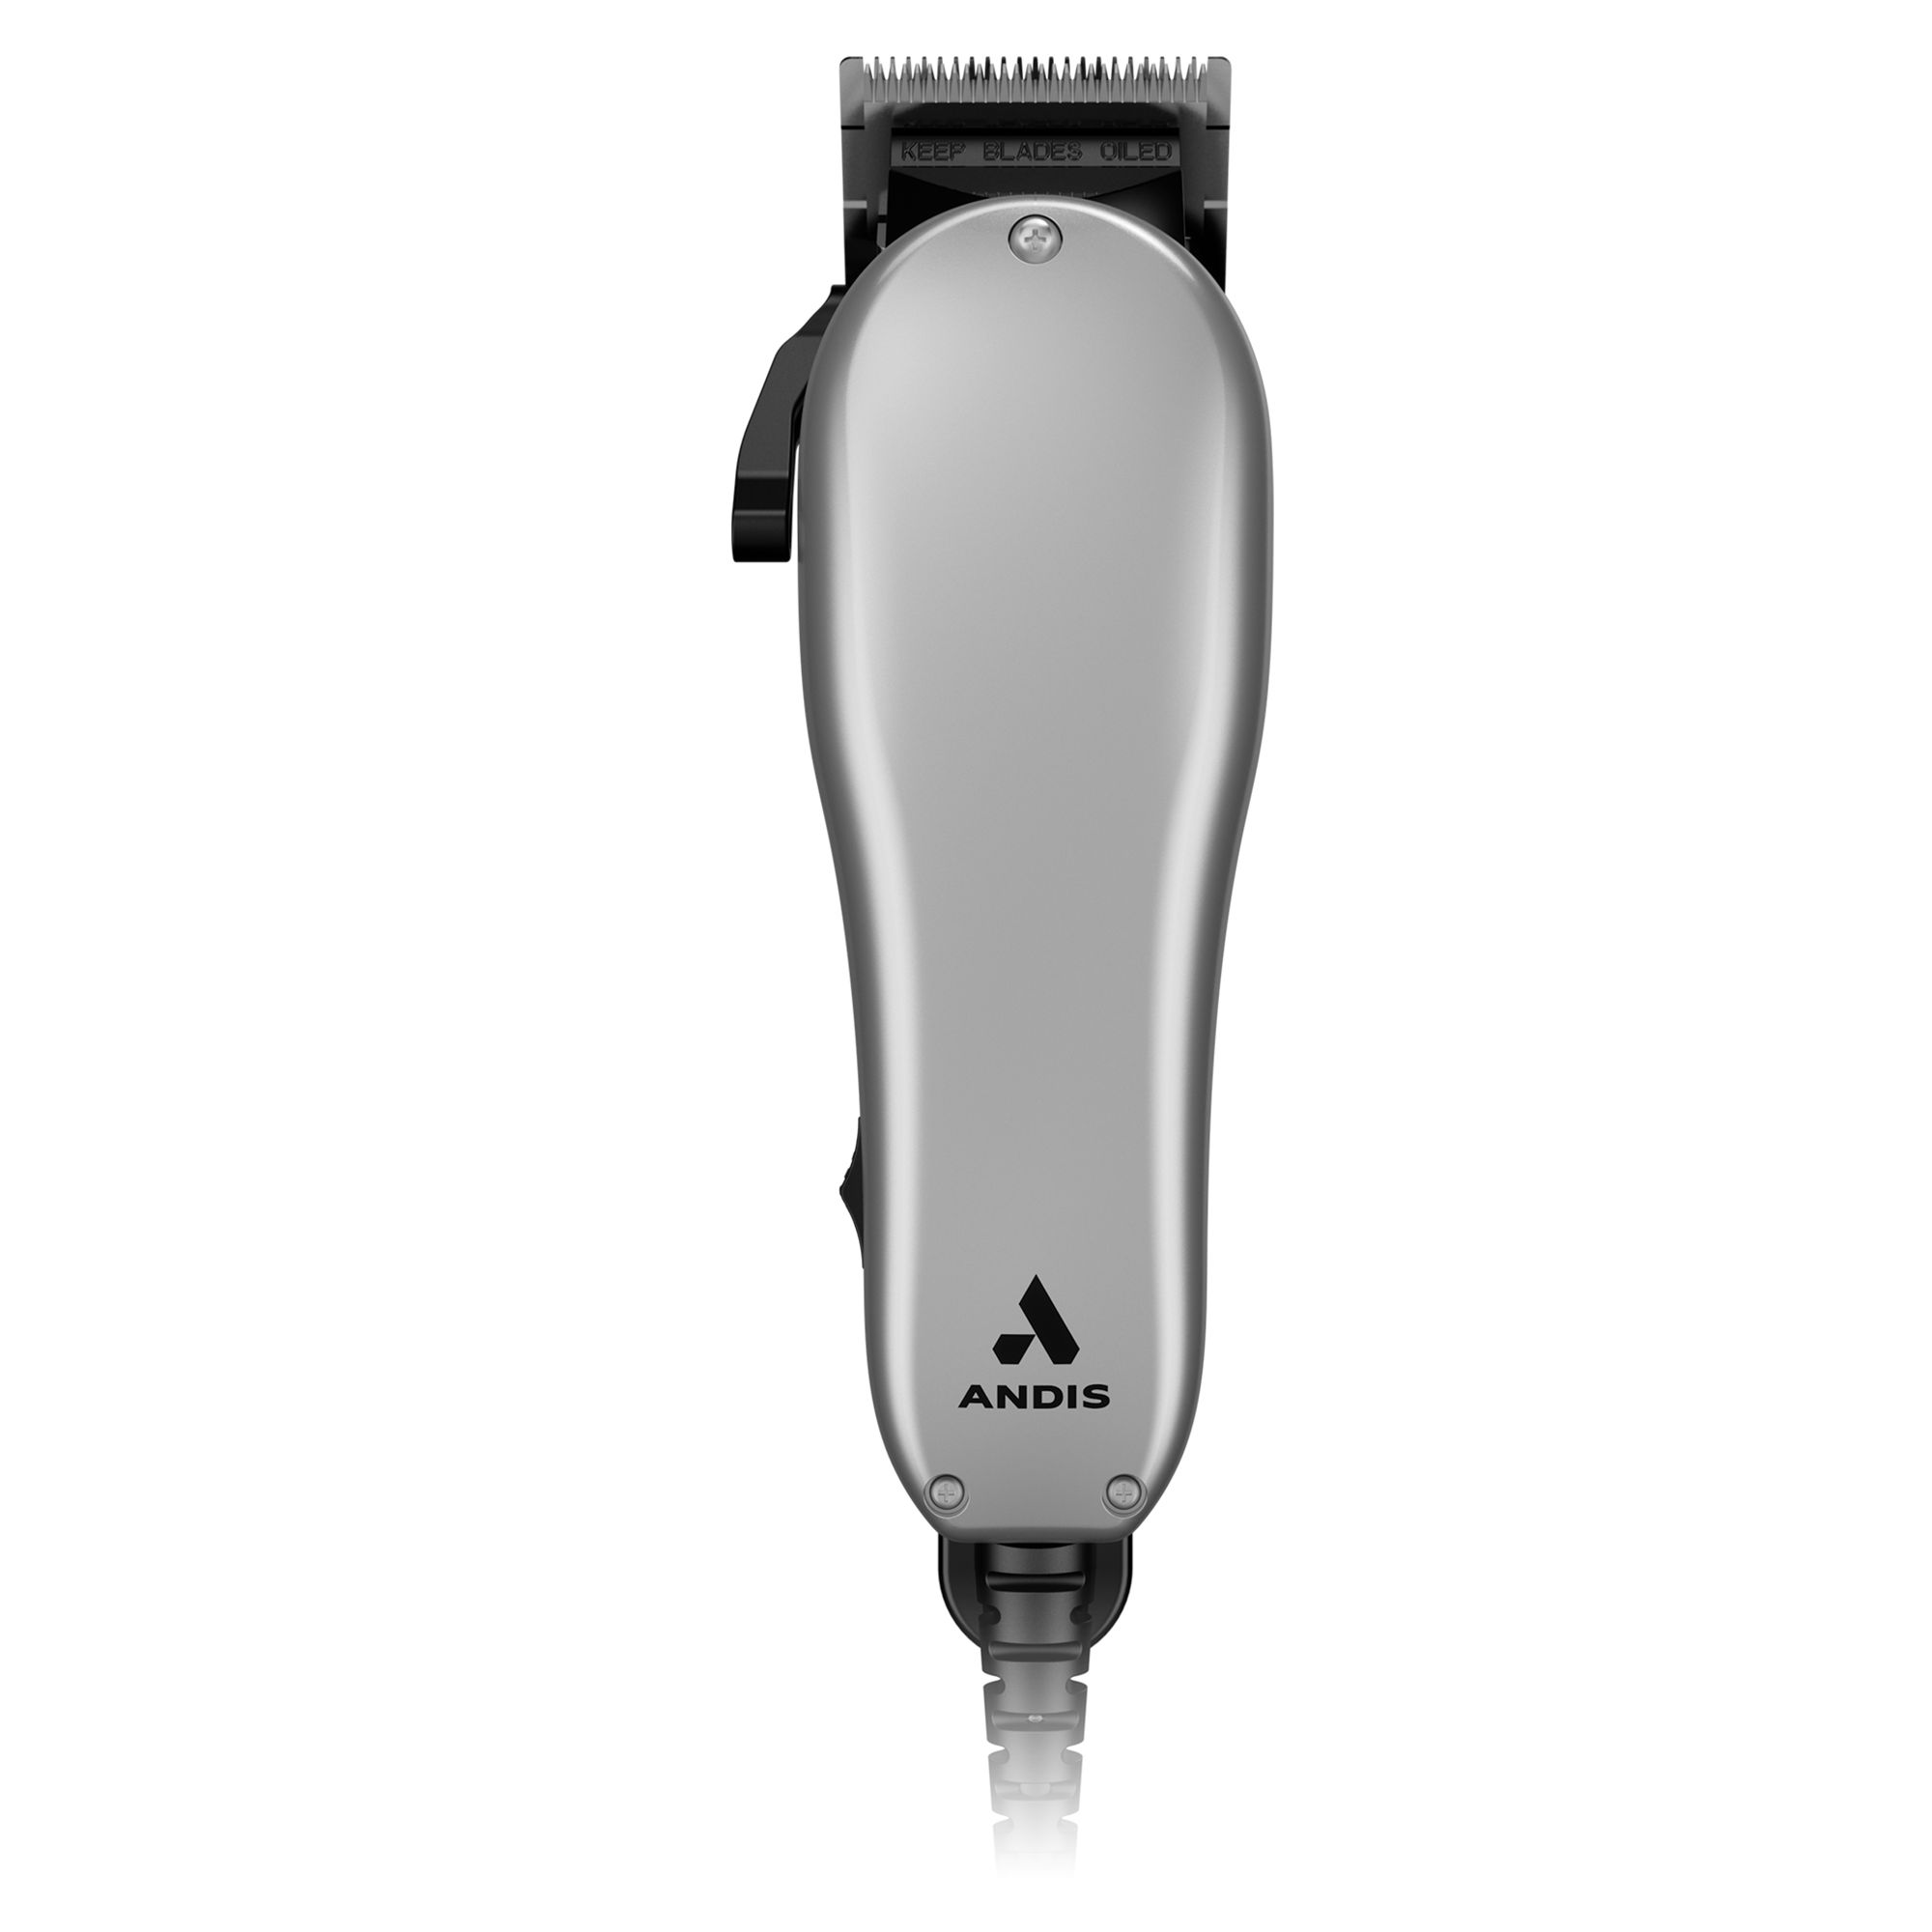 andis adjustable hair clippers